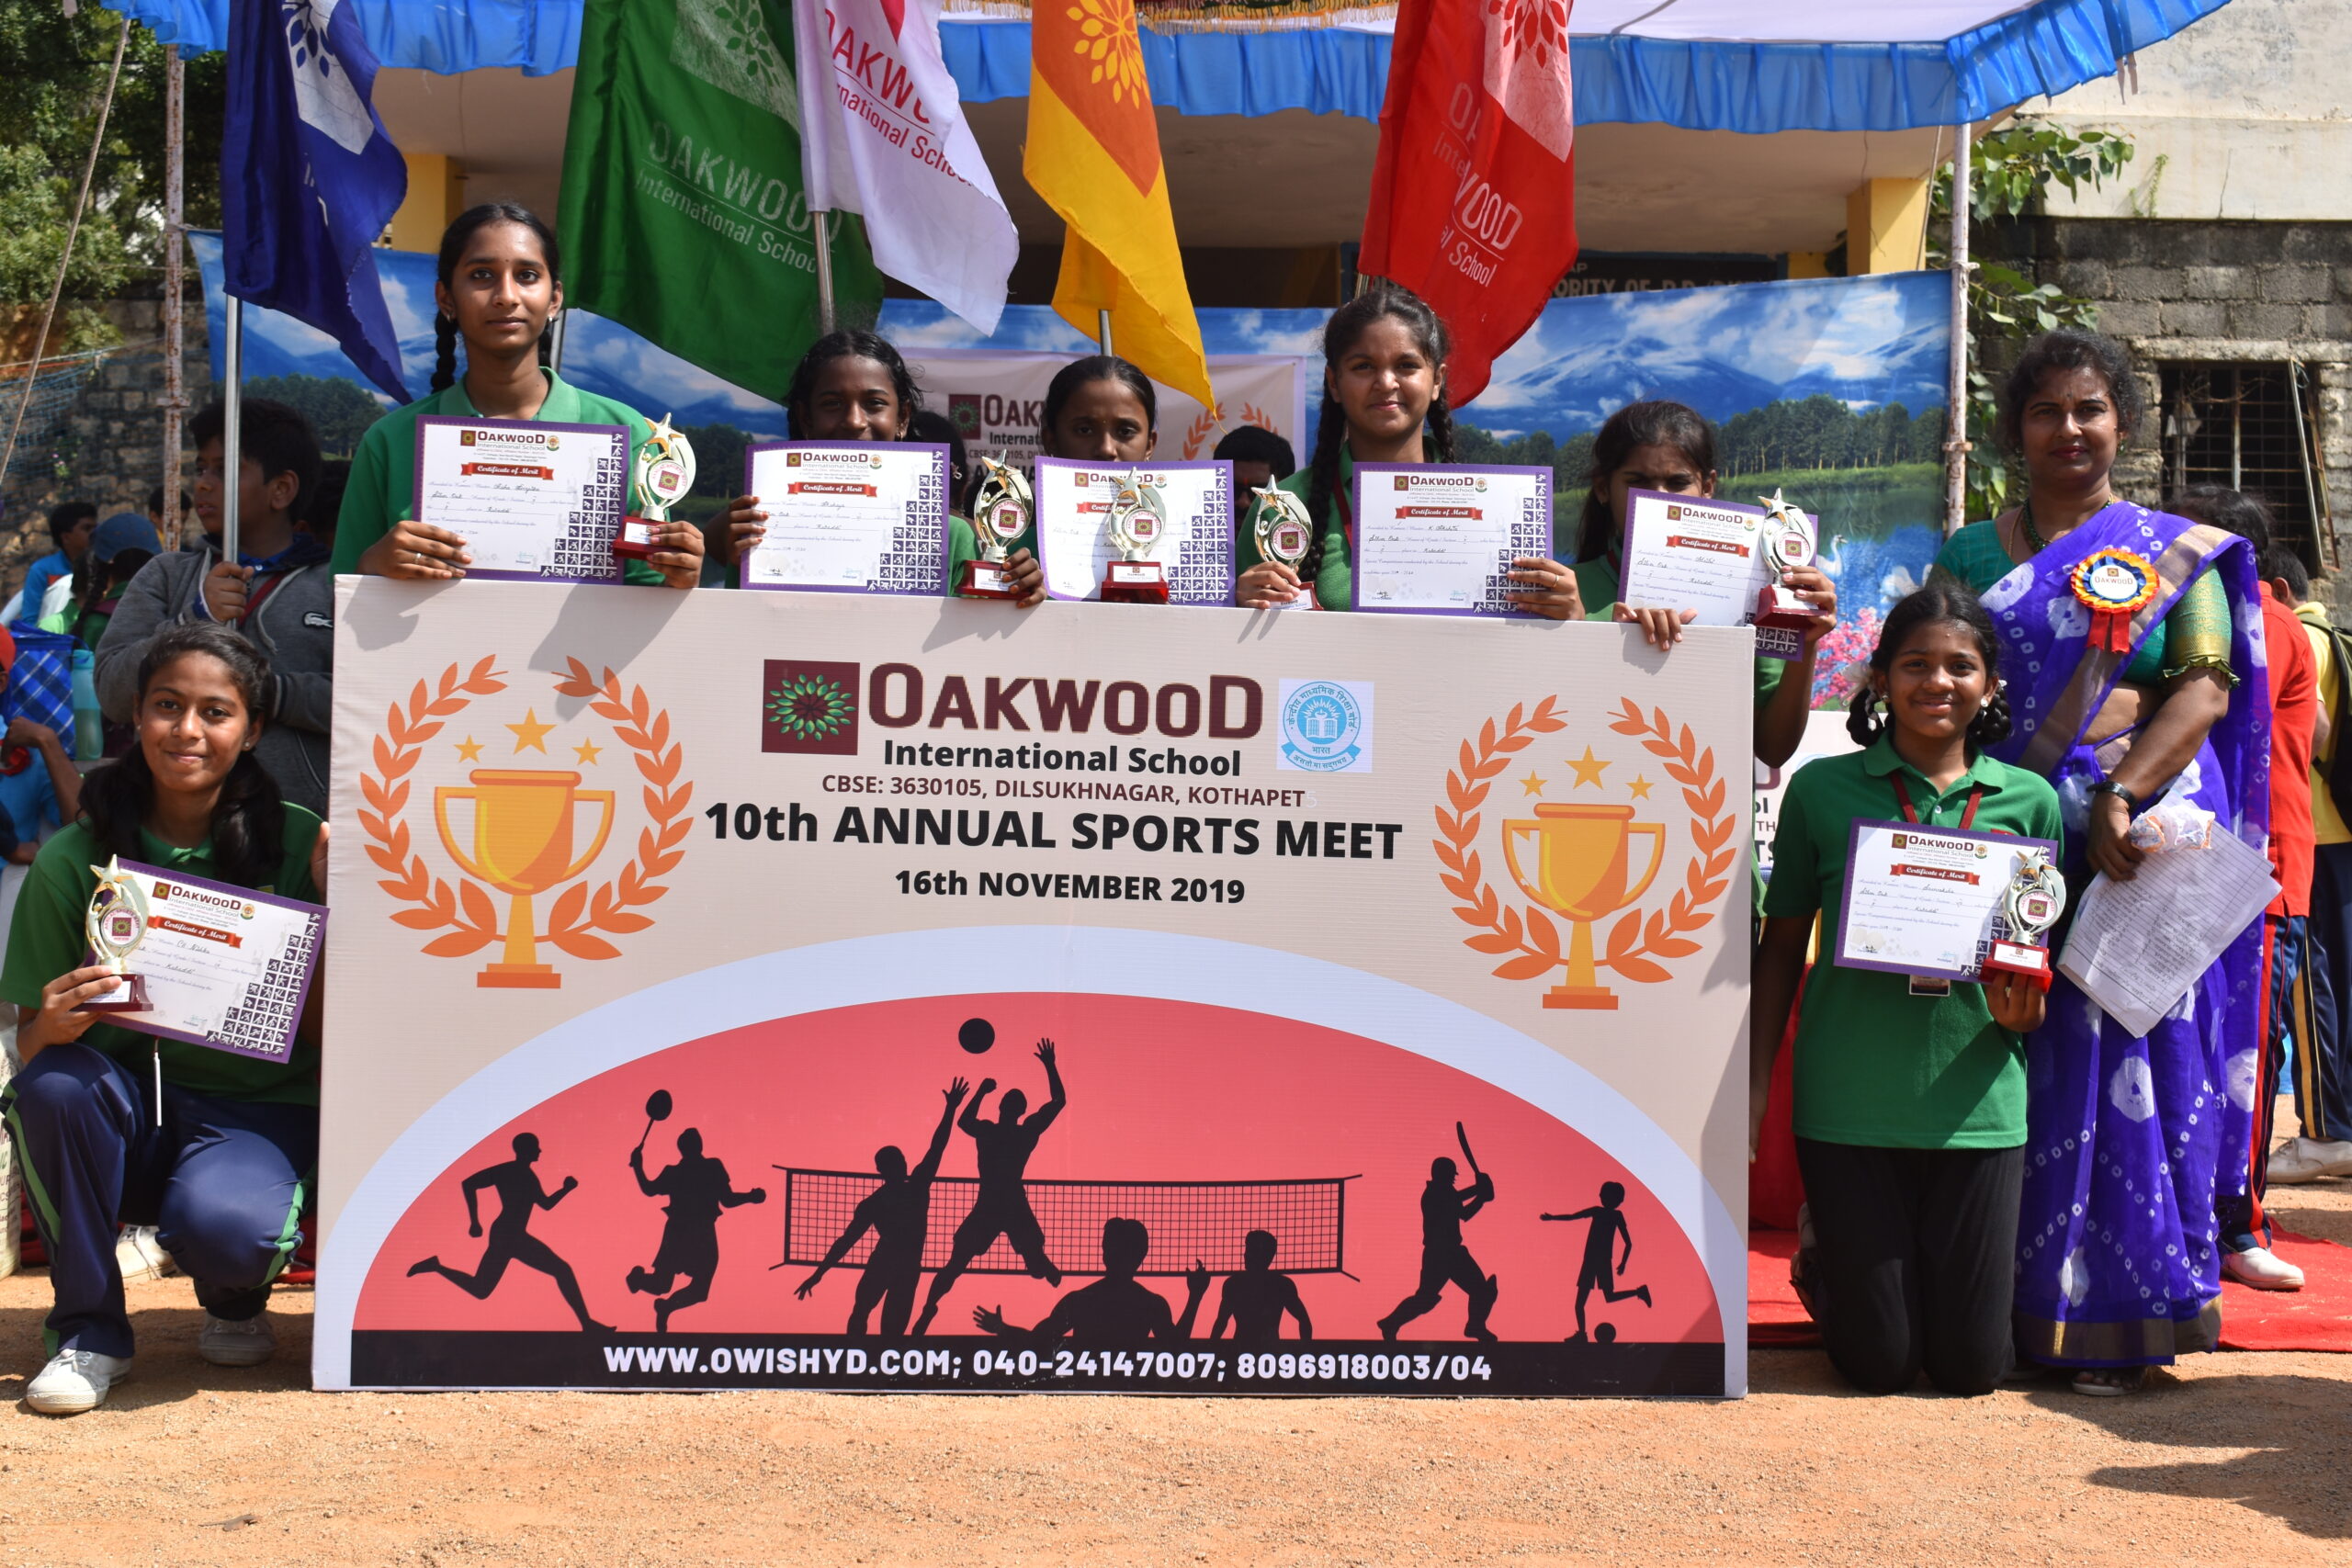 INTER SCHOOL KARATE COMPETITION
